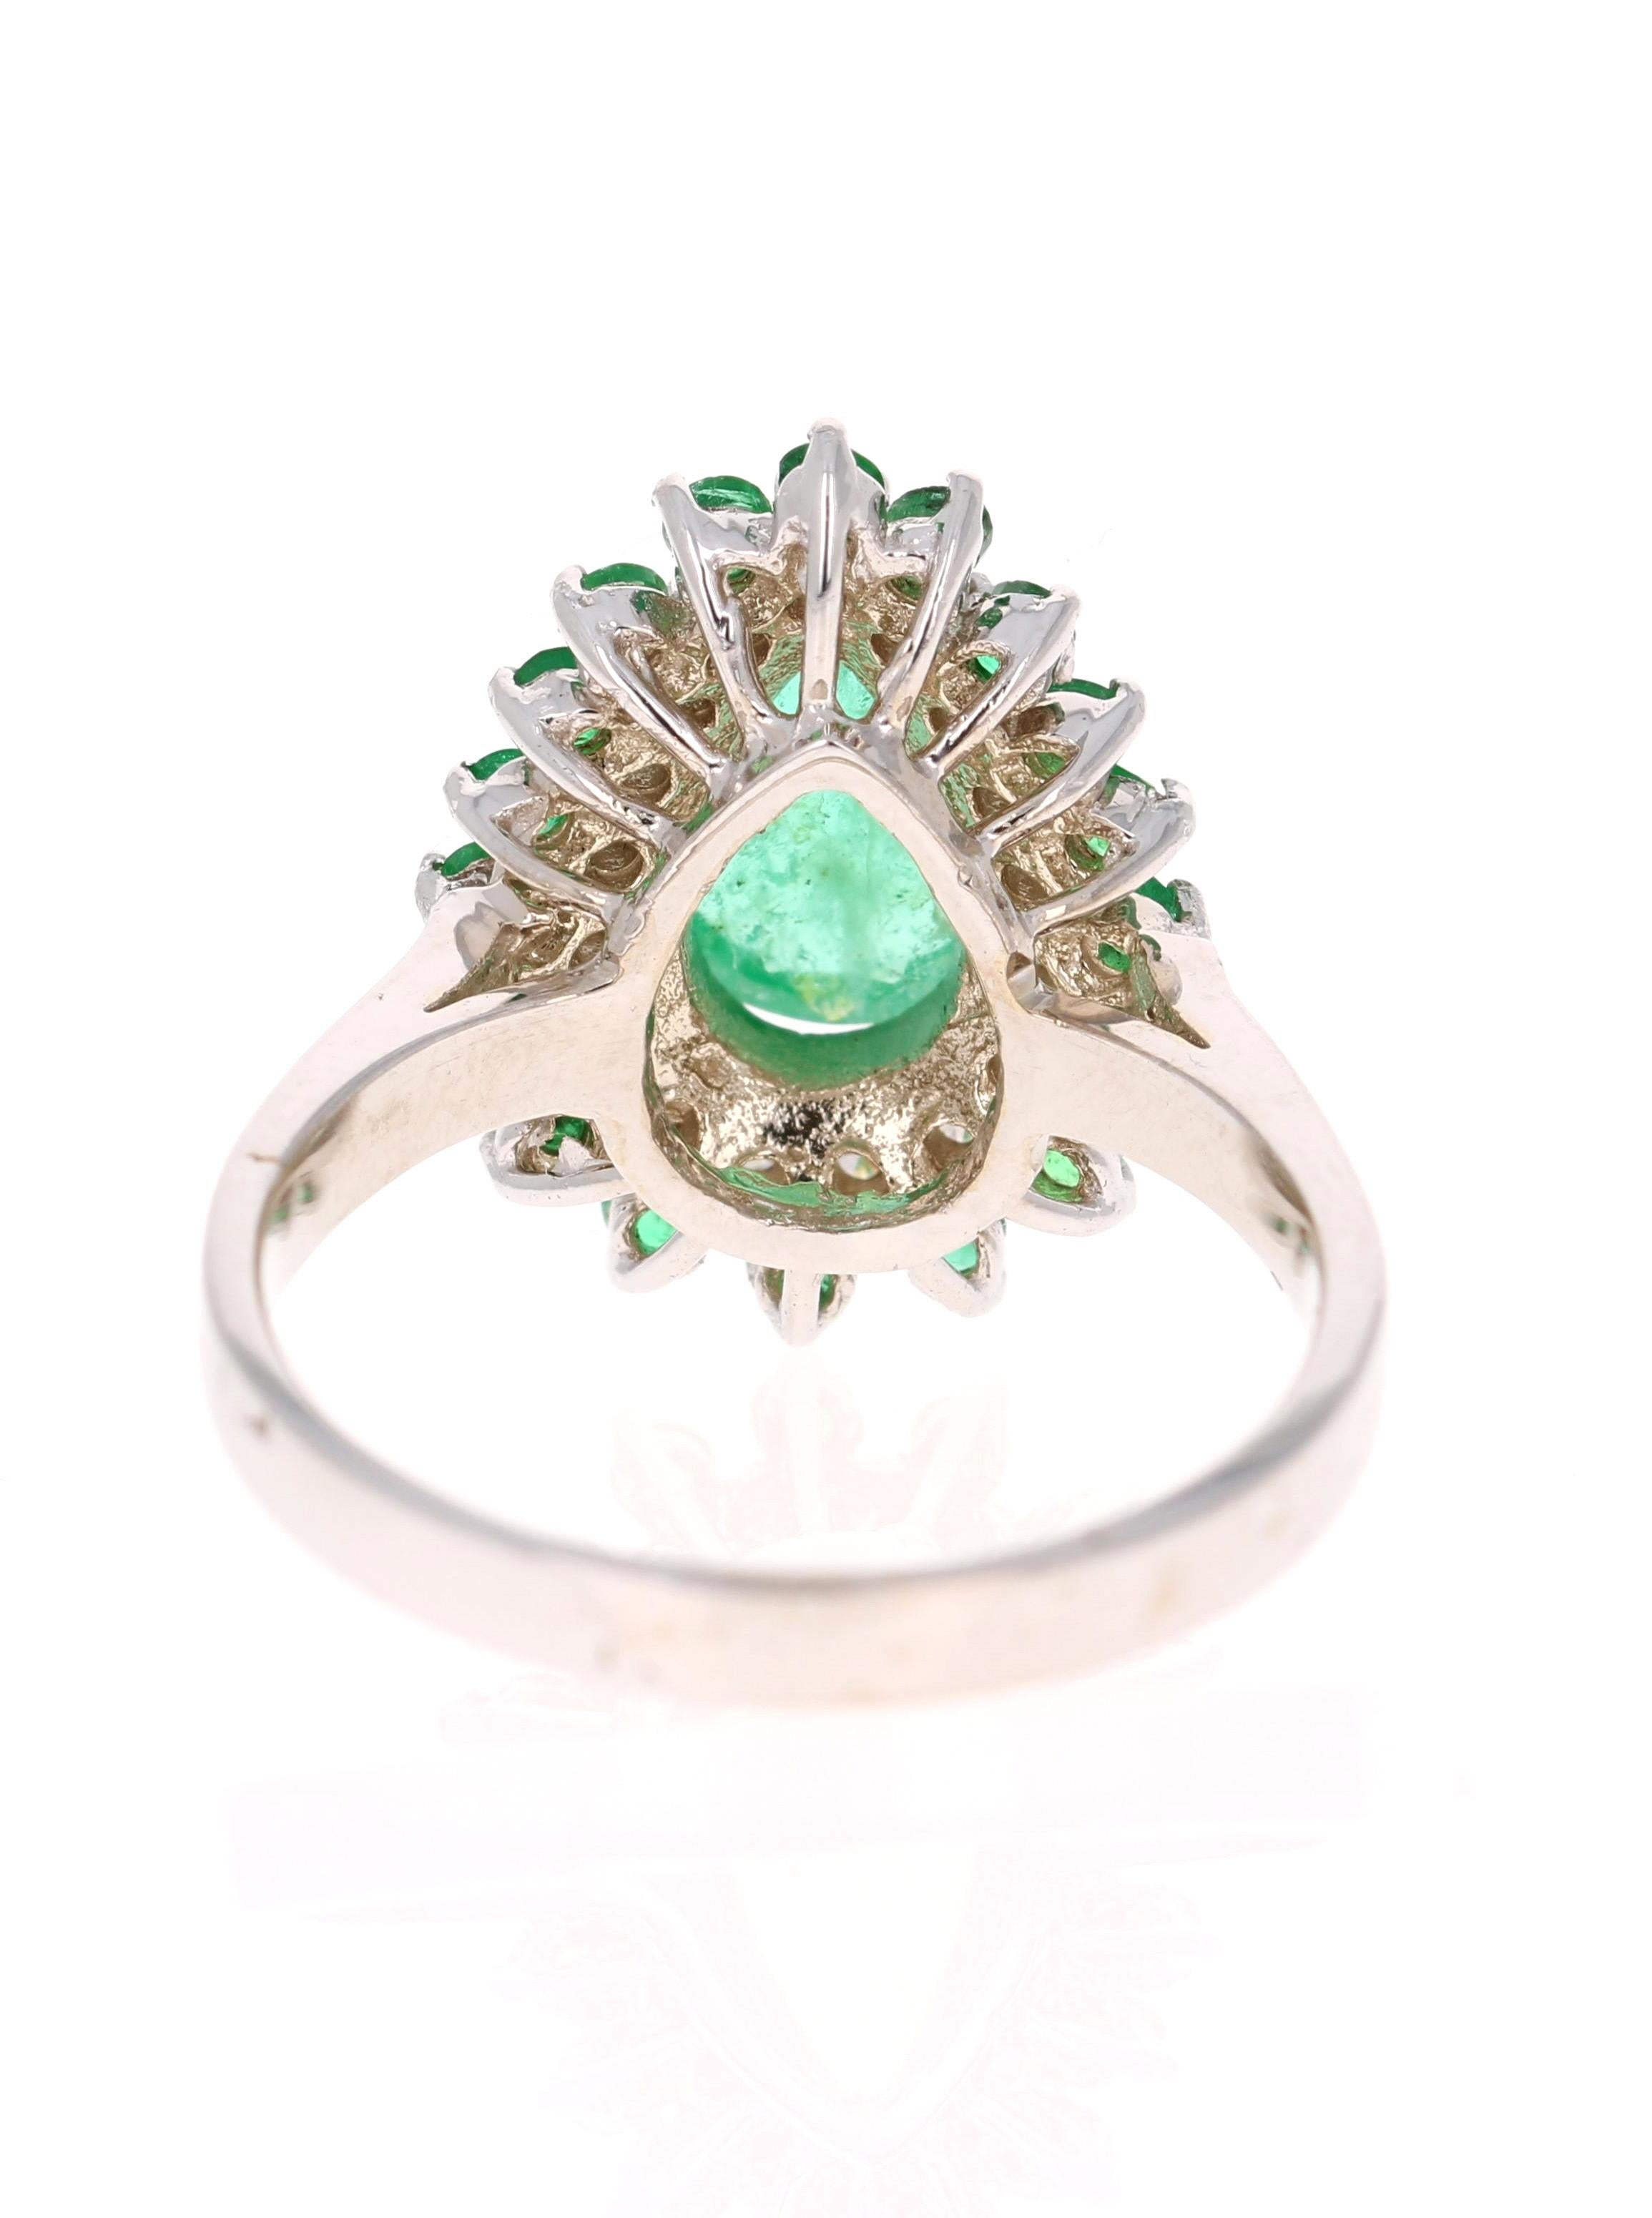 Contemporary 2.33 Carat Pear Cut Emerald Diamond 18 Karat White Gold Cocktail Ring For Sale